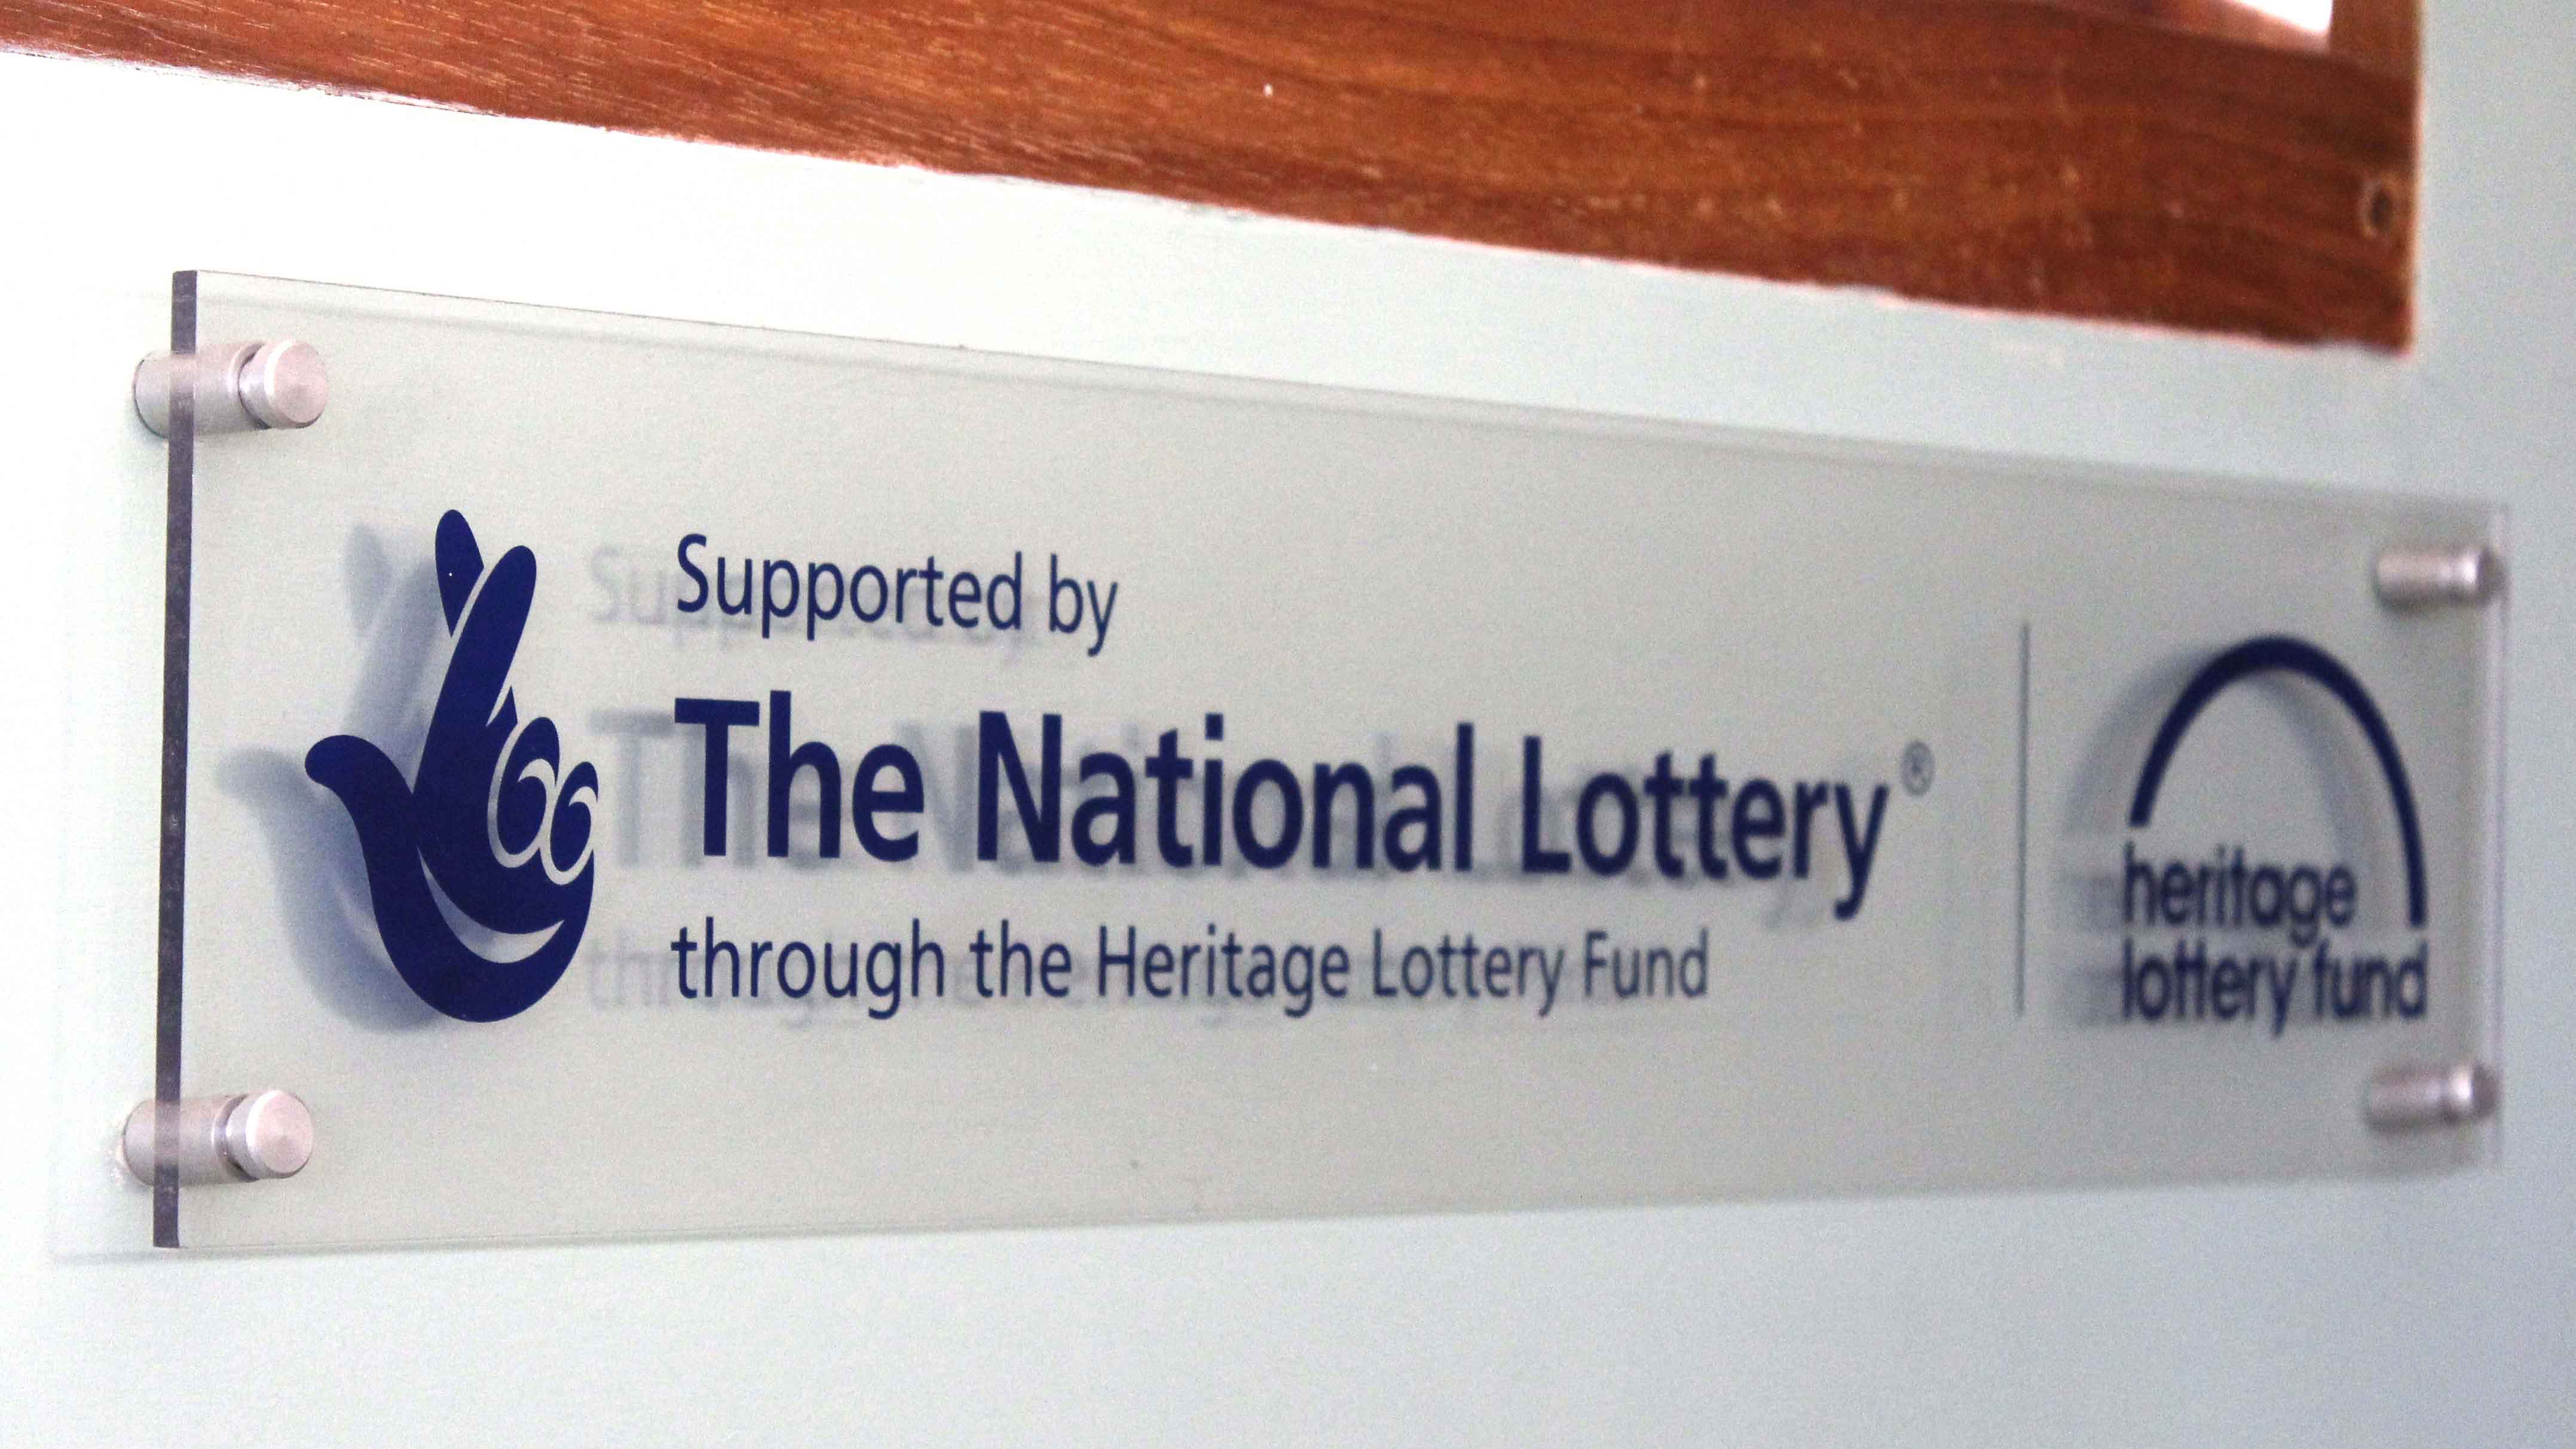 Lottery funding